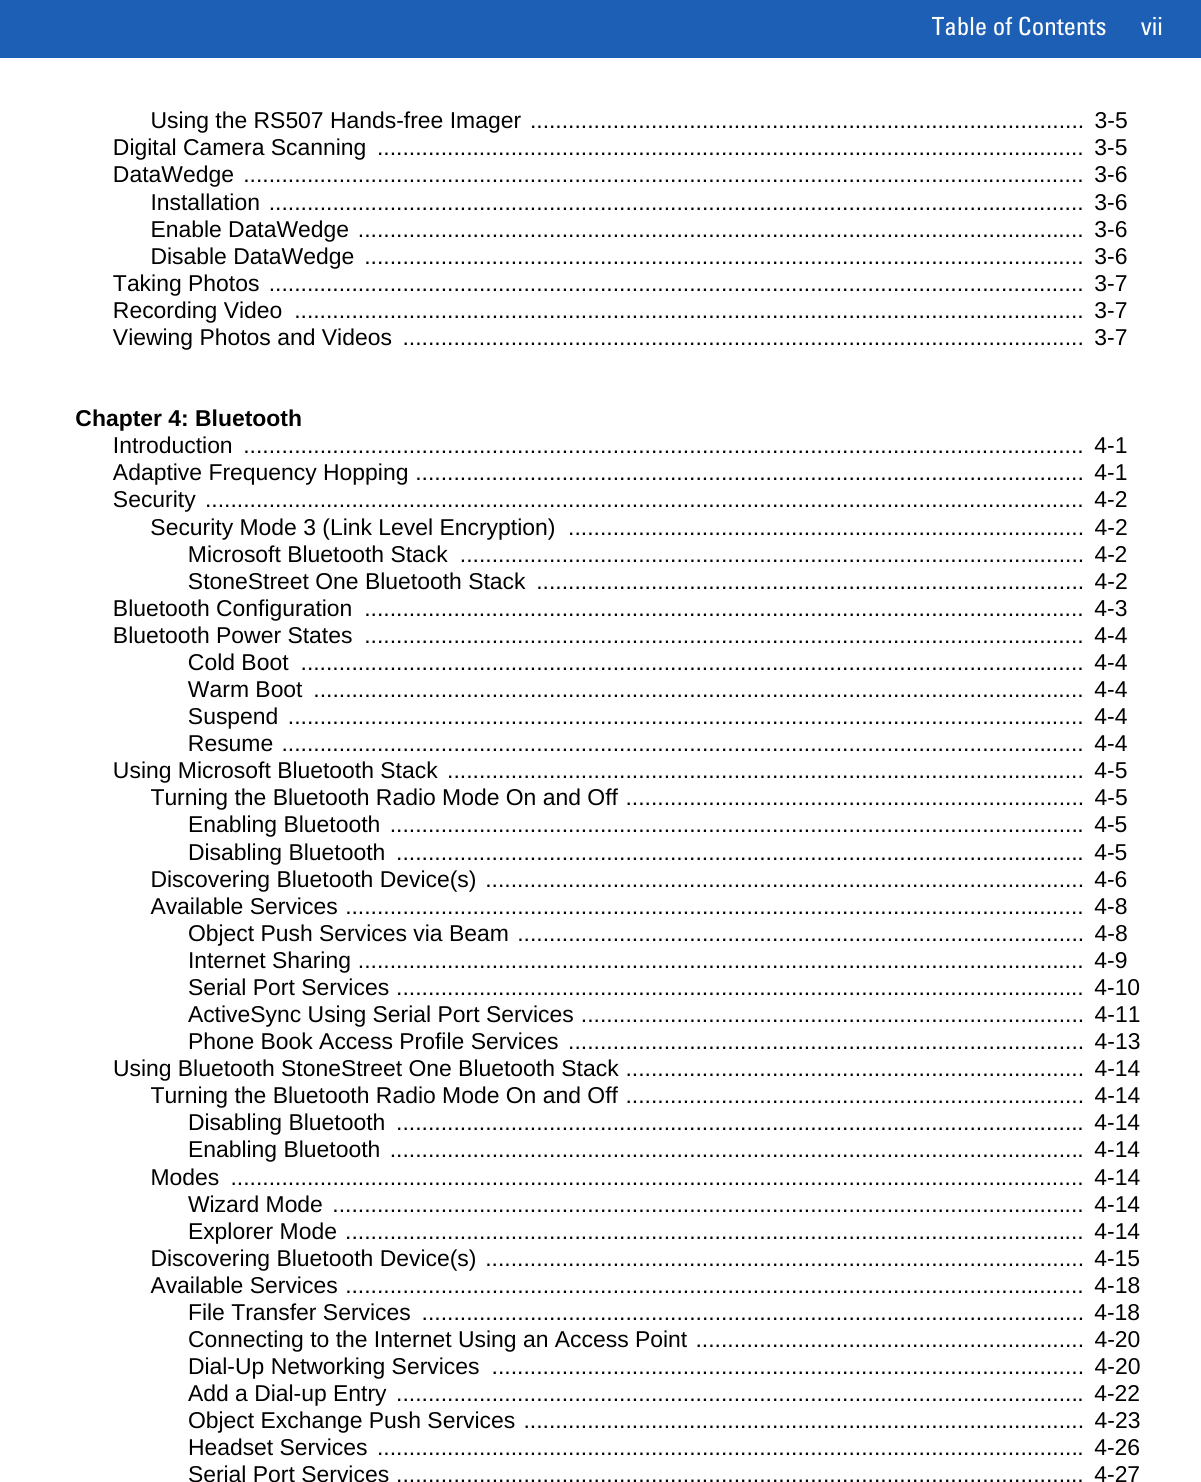 Table of Contents viiUsing the RS507 Hands-free Imager .......................................................................................  3-5Digital Camera Scanning  ...............................................................................................................  3-5DataWedge ....................................................................................................................................  3-6Installation ................................................................................................................................  3-6Enable DataWedge ..................................................................................................................  3-6Disable DataWedge  .................................................................................................................  3-6Taking Photos ................................................................................................................................  3-7Recording Video  ............................................................................................................................  3-7Viewing Photos and Videos  ...........................................................................................................  3-7Chapter 4: BluetoothIntroduction ....................................................................................................................................  4-1Adaptive Frequency Hopping .........................................................................................................  4-1Security ..........................................................................................................................................  4-2Security Mode 3 (Link Level Encryption)  .................................................................................  4-2Microsoft Bluetooth Stack  ..................................................................................................  4-2StoneStreet One Bluetooth Stack  ......................................................................................  4-2Bluetooth Configuration  .................................................................................................................  4-3Bluetooth Power States  .................................................................................................................  4-4Cold Boot  ...........................................................................................................................  4-4Warm Boot  .........................................................................................................................  4-4Suspend .............................................................................................................................  4-4Resume ..............................................................................................................................  4-4Using Microsoft Bluetooth Stack ....................................................................................................  4-5Turning the Bluetooth Radio Mode On and Off ........................................................................  4-5Enabling Bluetooth .............................................................................................................  4-5Disabling Bluetooth  ............................................................................................................  4-5Discovering Bluetooth Device(s) ..............................................................................................  4-6Available Services ....................................................................................................................  4-8Object Push Services via Beam .........................................................................................  4-8Internet Sharing ..................................................................................................................  4-9Serial Port Services ............................................................................................................  4-10ActiveSync Using Serial Port Services ...............................................................................  4-11Phone Book Access Profile Services .................................................................................  4-13Using Bluetooth StoneStreet One Bluetooth Stack ........................................................................  4-14Turning the Bluetooth Radio Mode On and Off ........................................................................  4-14Disabling Bluetooth  ............................................................................................................  4-14Enabling Bluetooth .............................................................................................................  4-14Modes ......................................................................................................................................  4-14Wizard Mode ......................................................................................................................  4-14Explorer Mode ....................................................................................................................  4-14Discovering Bluetooth Device(s) ..............................................................................................  4-15Available Services ....................................................................................................................  4-18File Transfer Services  ........................................................................................................  4-18Connecting to the Internet Using an Access Point .............................................................  4-20Dial-Up Networking Services  .............................................................................................  4-20Add a Dial-up Entry ............................................................................................................  4-22Object Exchange Push Services ........................................................................................  4-23Headset Services ...............................................................................................................  4-26Serial Port Services ............................................................................................................  4-27